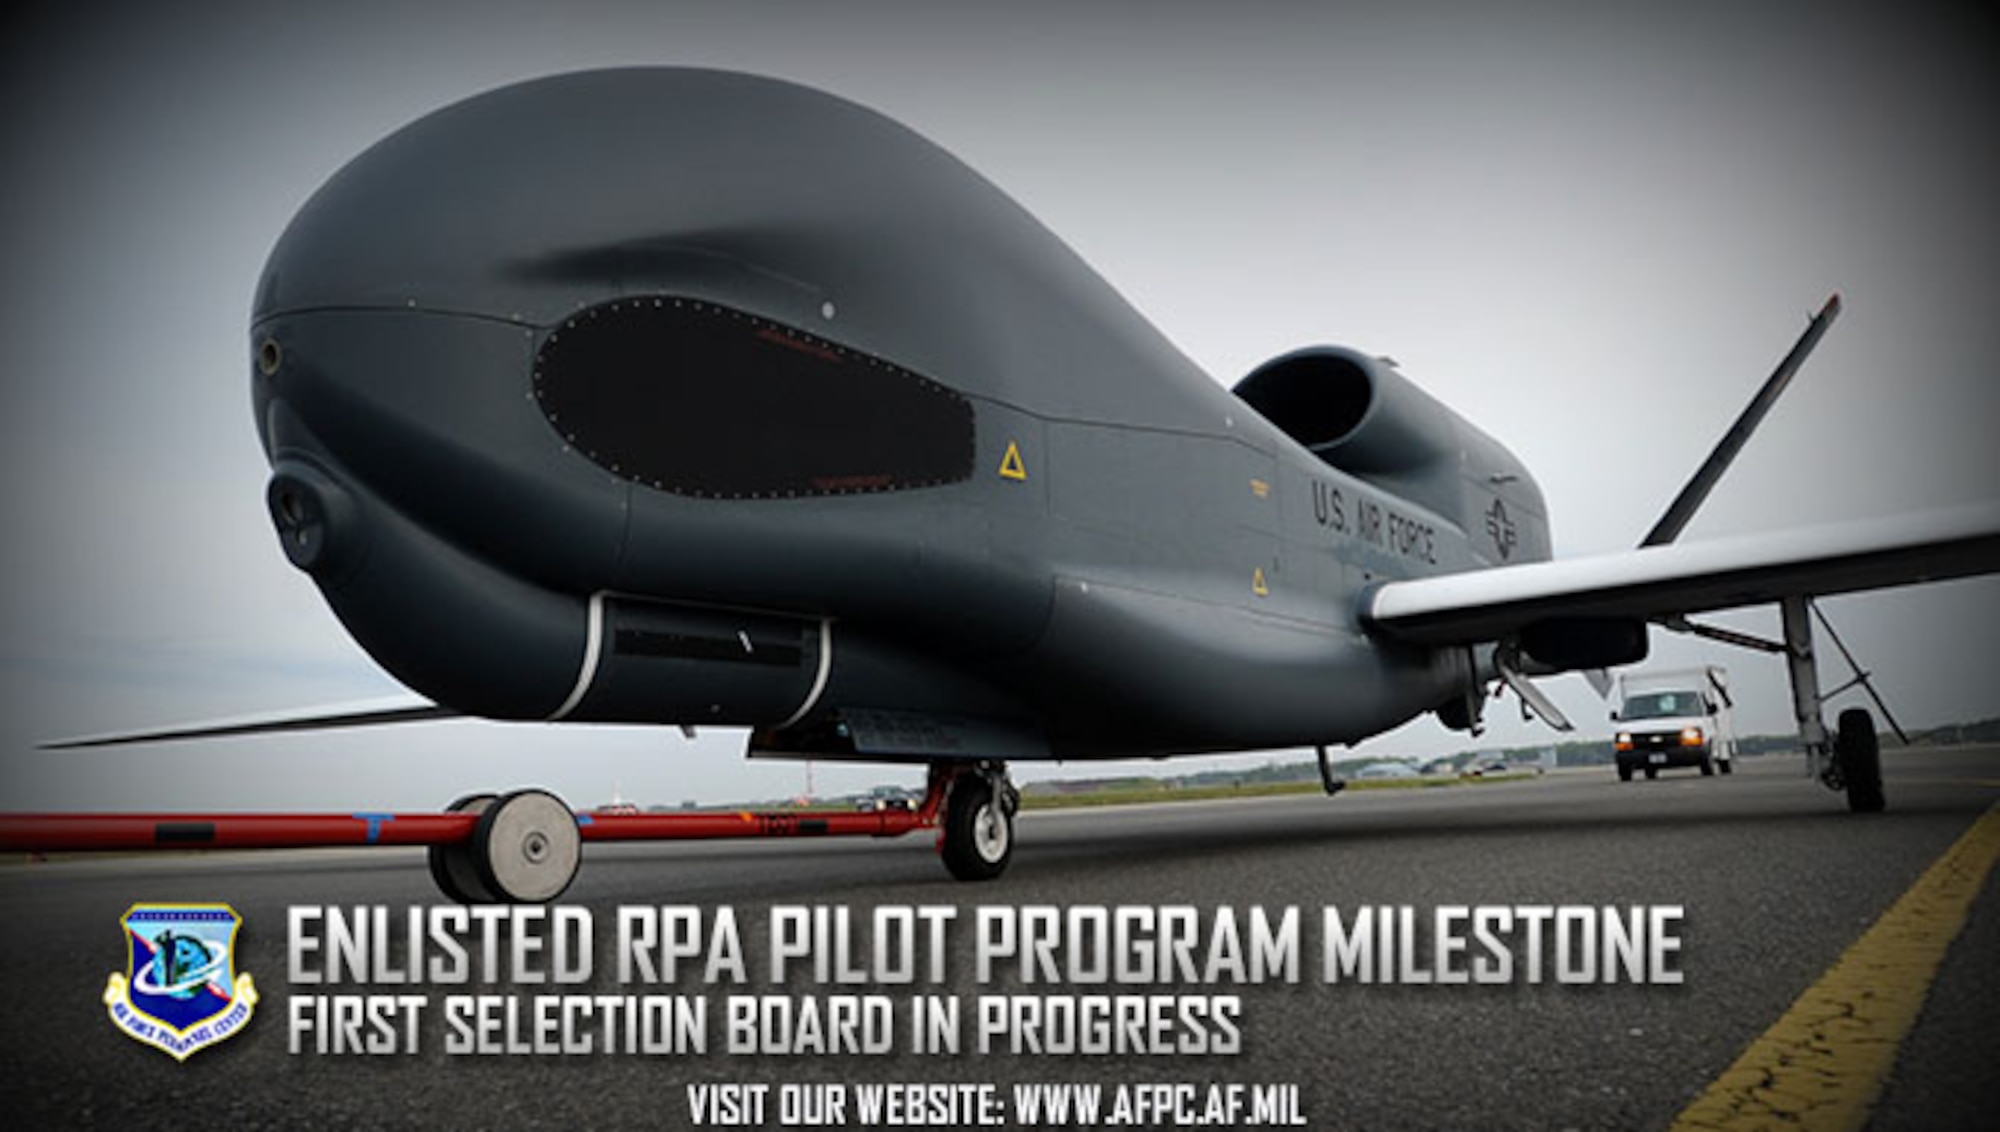 The enlisted remotely piloted aircraft program hits another milestone, making history with the first selection board currently in progress. 185 Airmen will meet the board, hoping to be selected in the next enlisted group to attend RPA pilot training. (U.S. Air Force photo by Tech. Sgt. April Quintanilla)